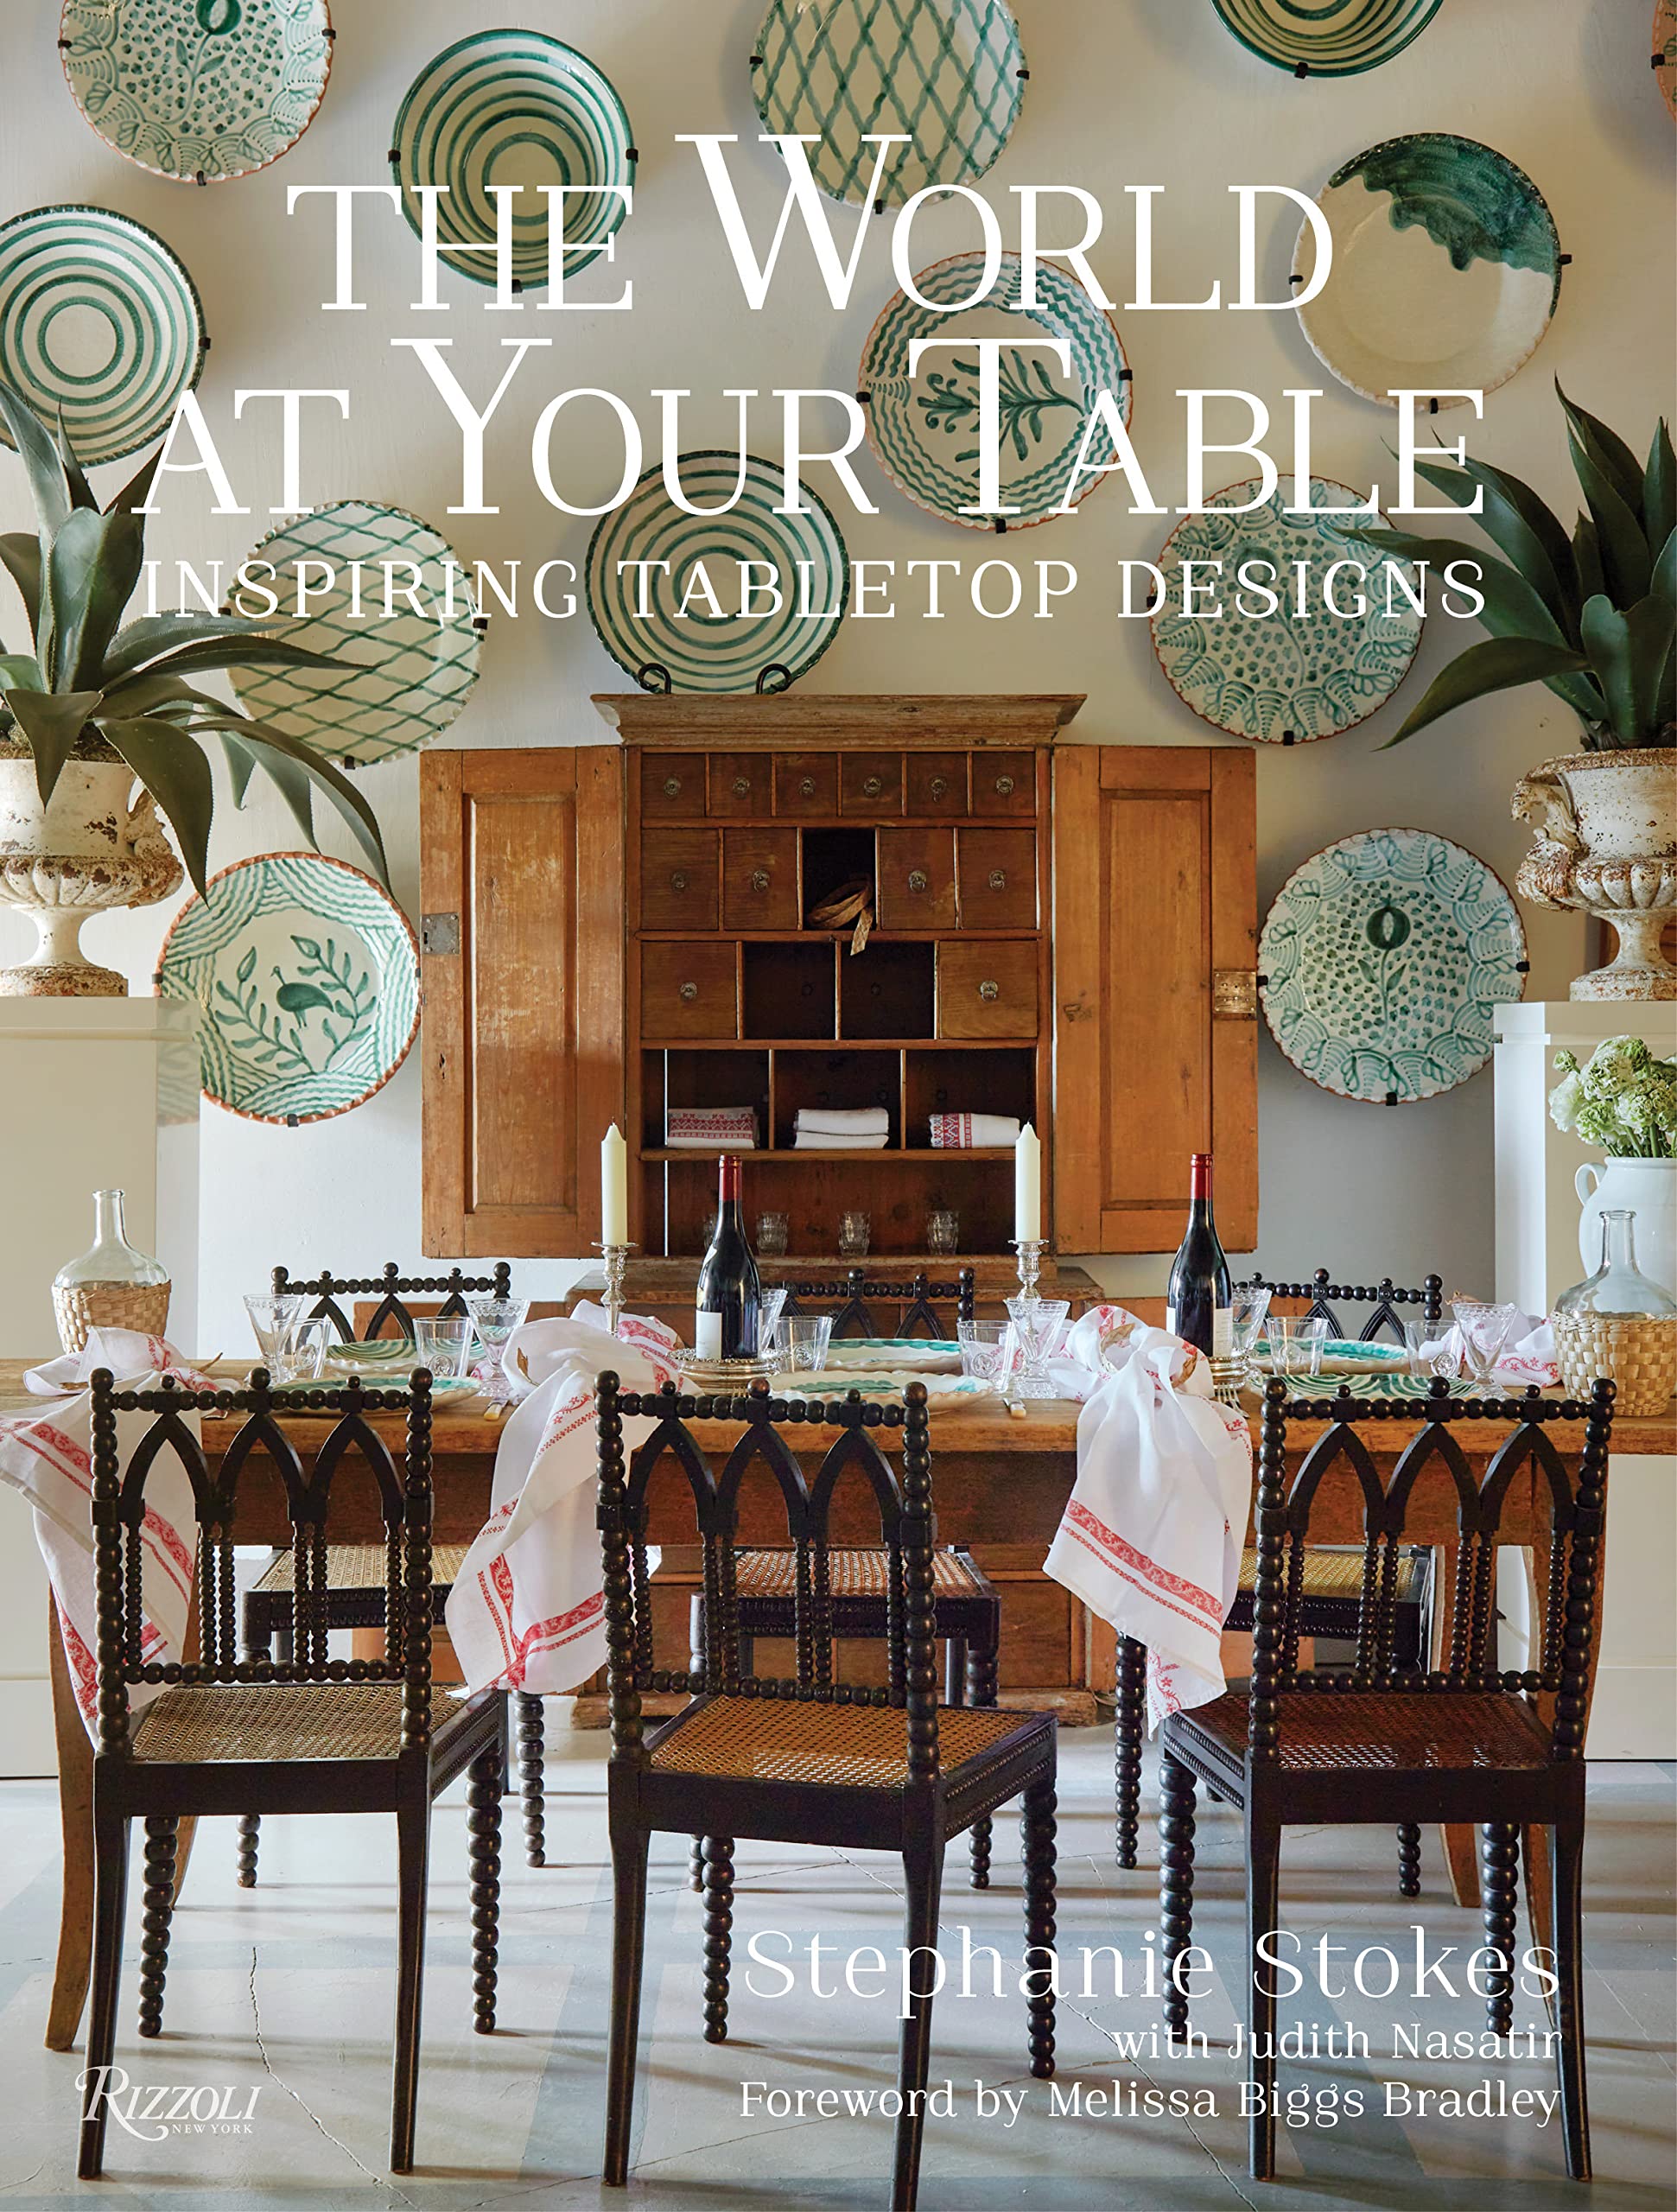 The World at Your Table: Inspiring Tabletop Designs